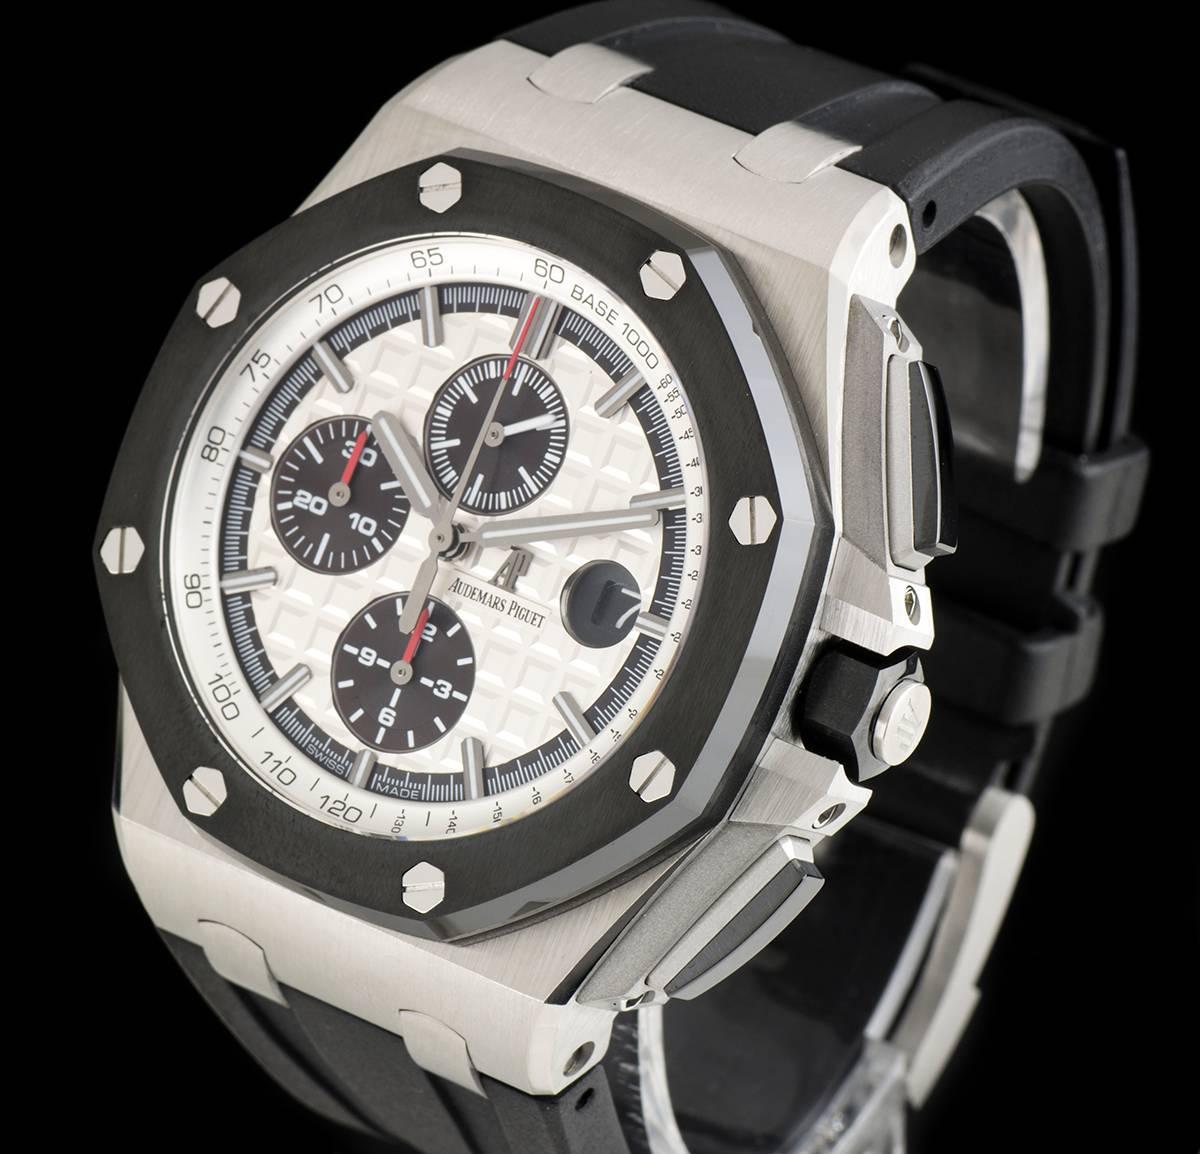 A Stainless Steel Royal Oak Offshore Chronograph Gents Wristwatch, silver dial with a "Mega Tapisserie" pattern, date at 3 0'clock, 12 hour recorder at 6 0'clock, 30 minute recorder at 9 0'clock, small seconds at 12 0'clock, tachymetre